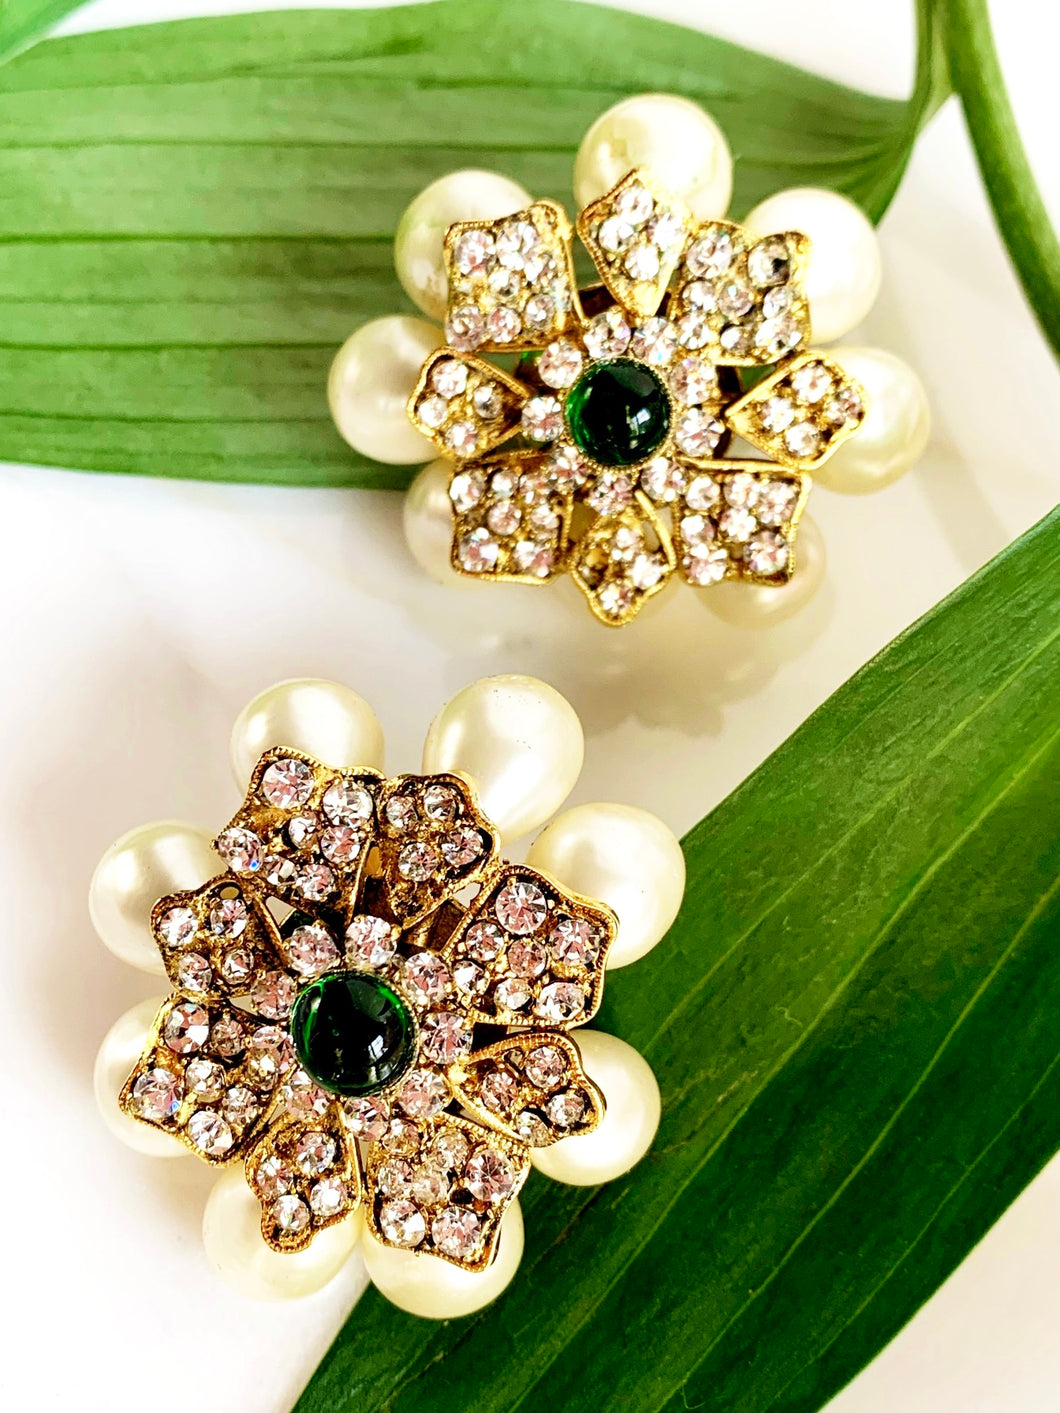 CHANEL HAUTE COUTURE MASSIVE EMERALD GRIPOIX AND GLASS PEARL FLOWER EARRINGS